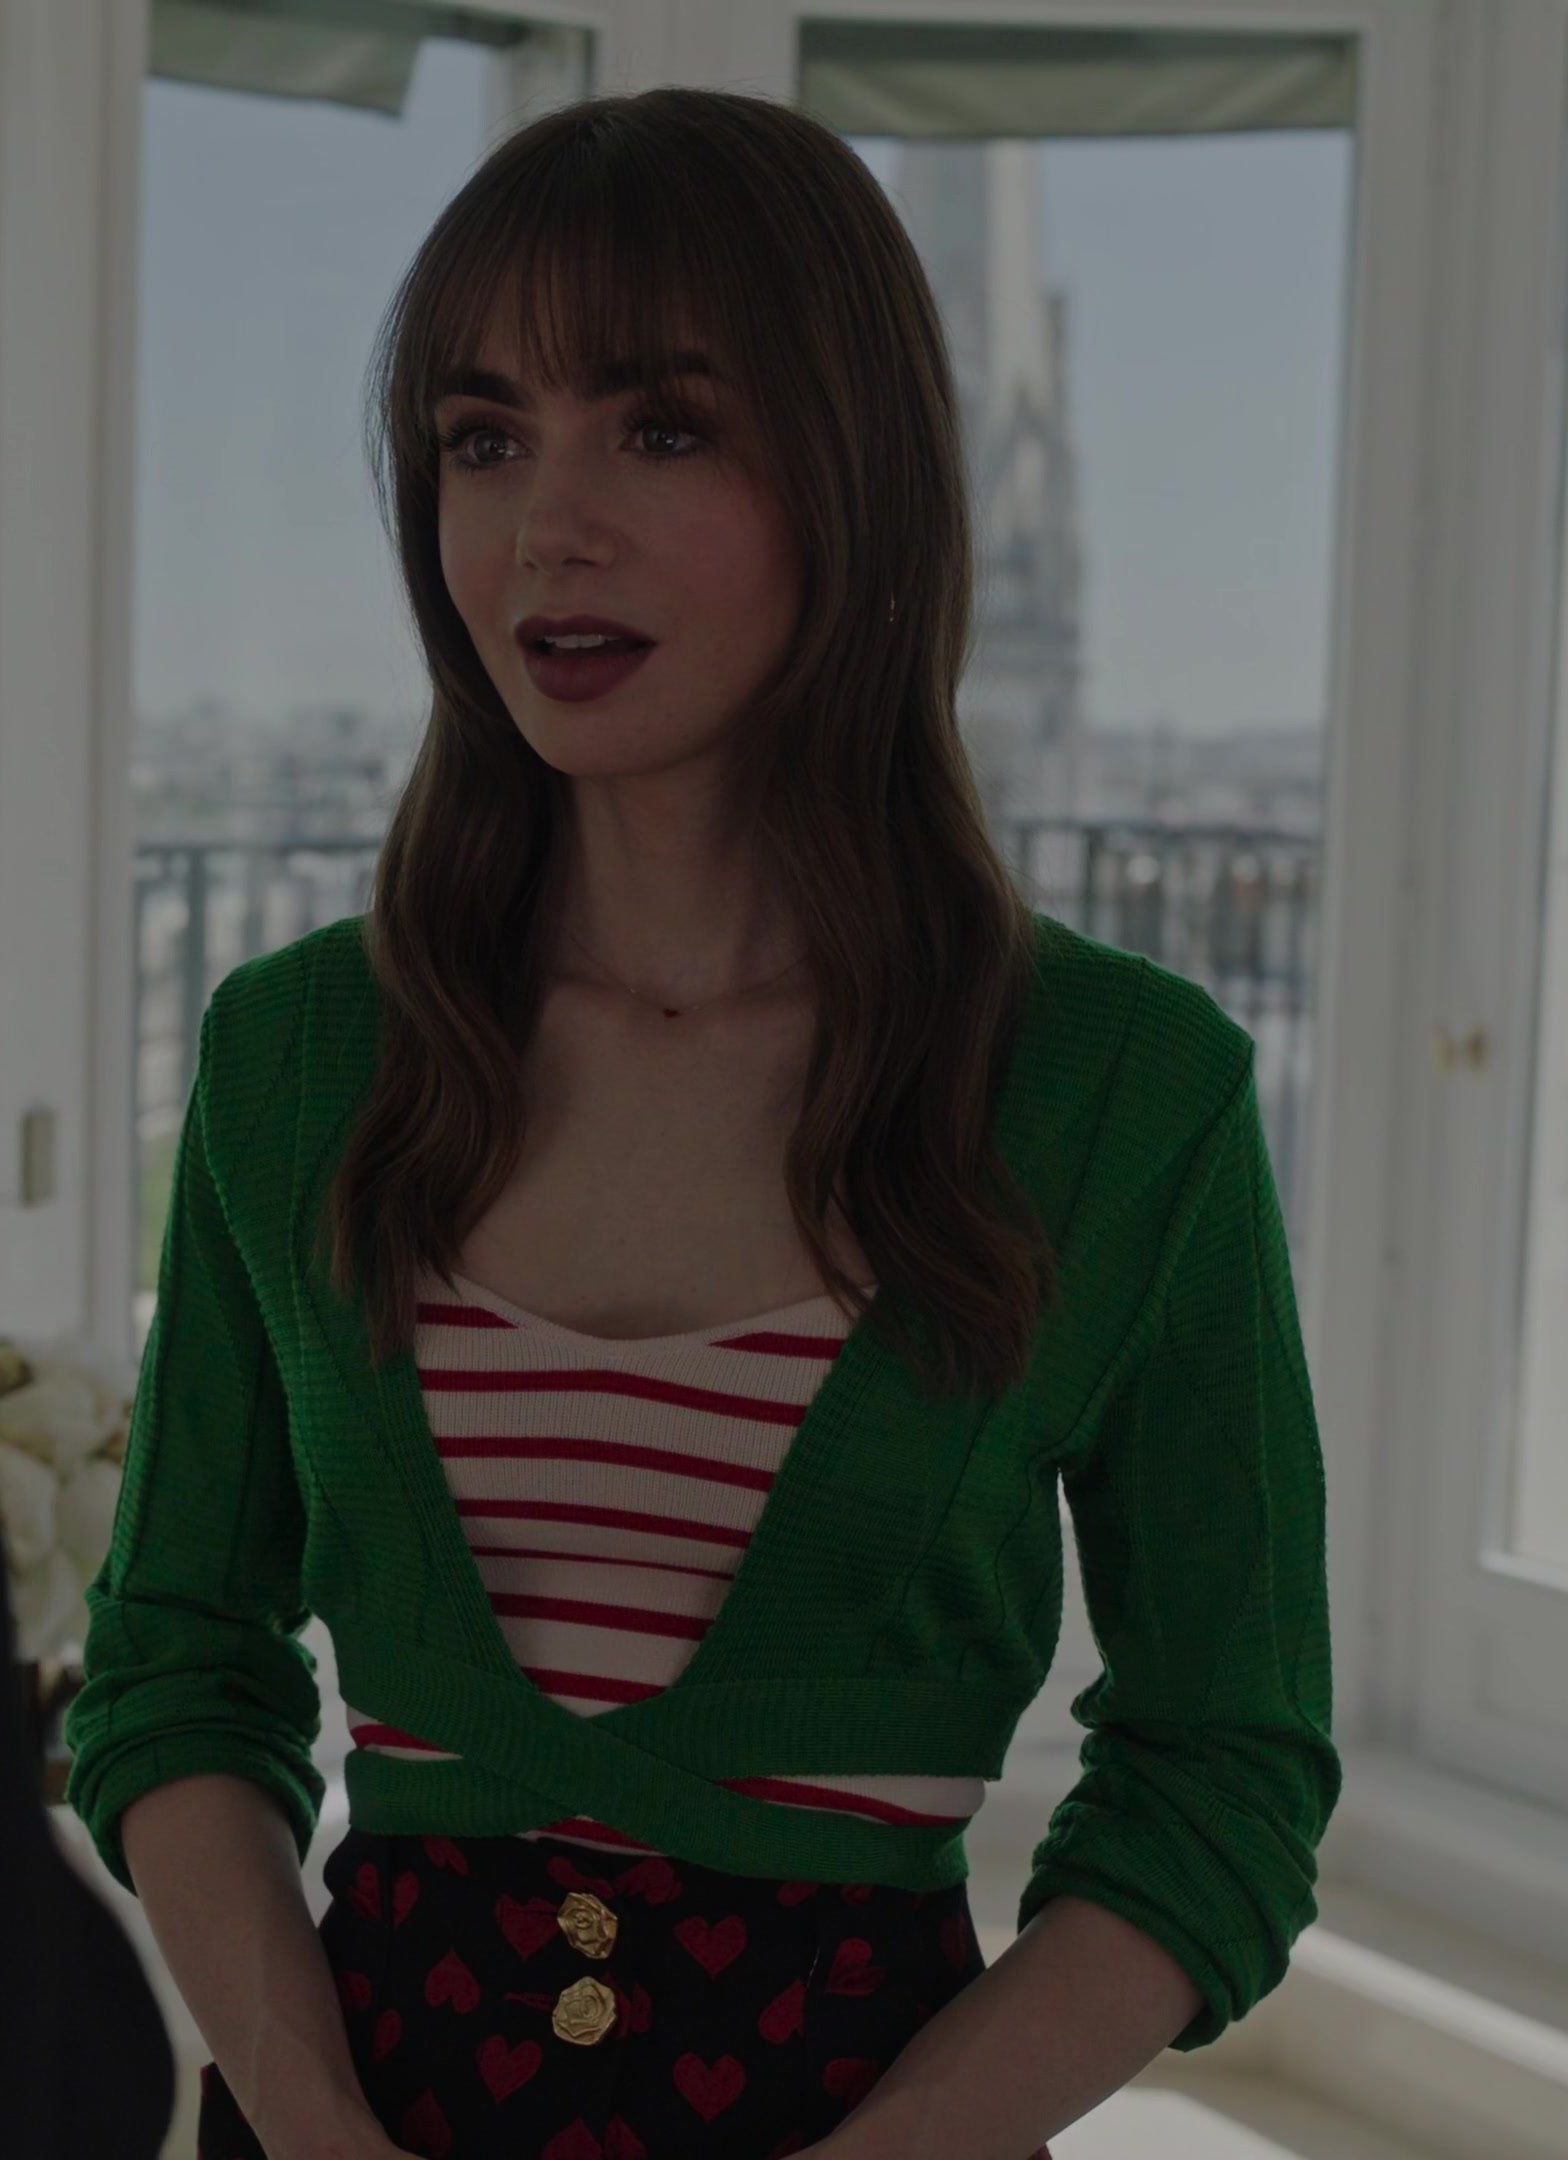 Worn on Emily in Paris TV Show - Green Crop Cardigan of Lily Collins as Emily Cooper